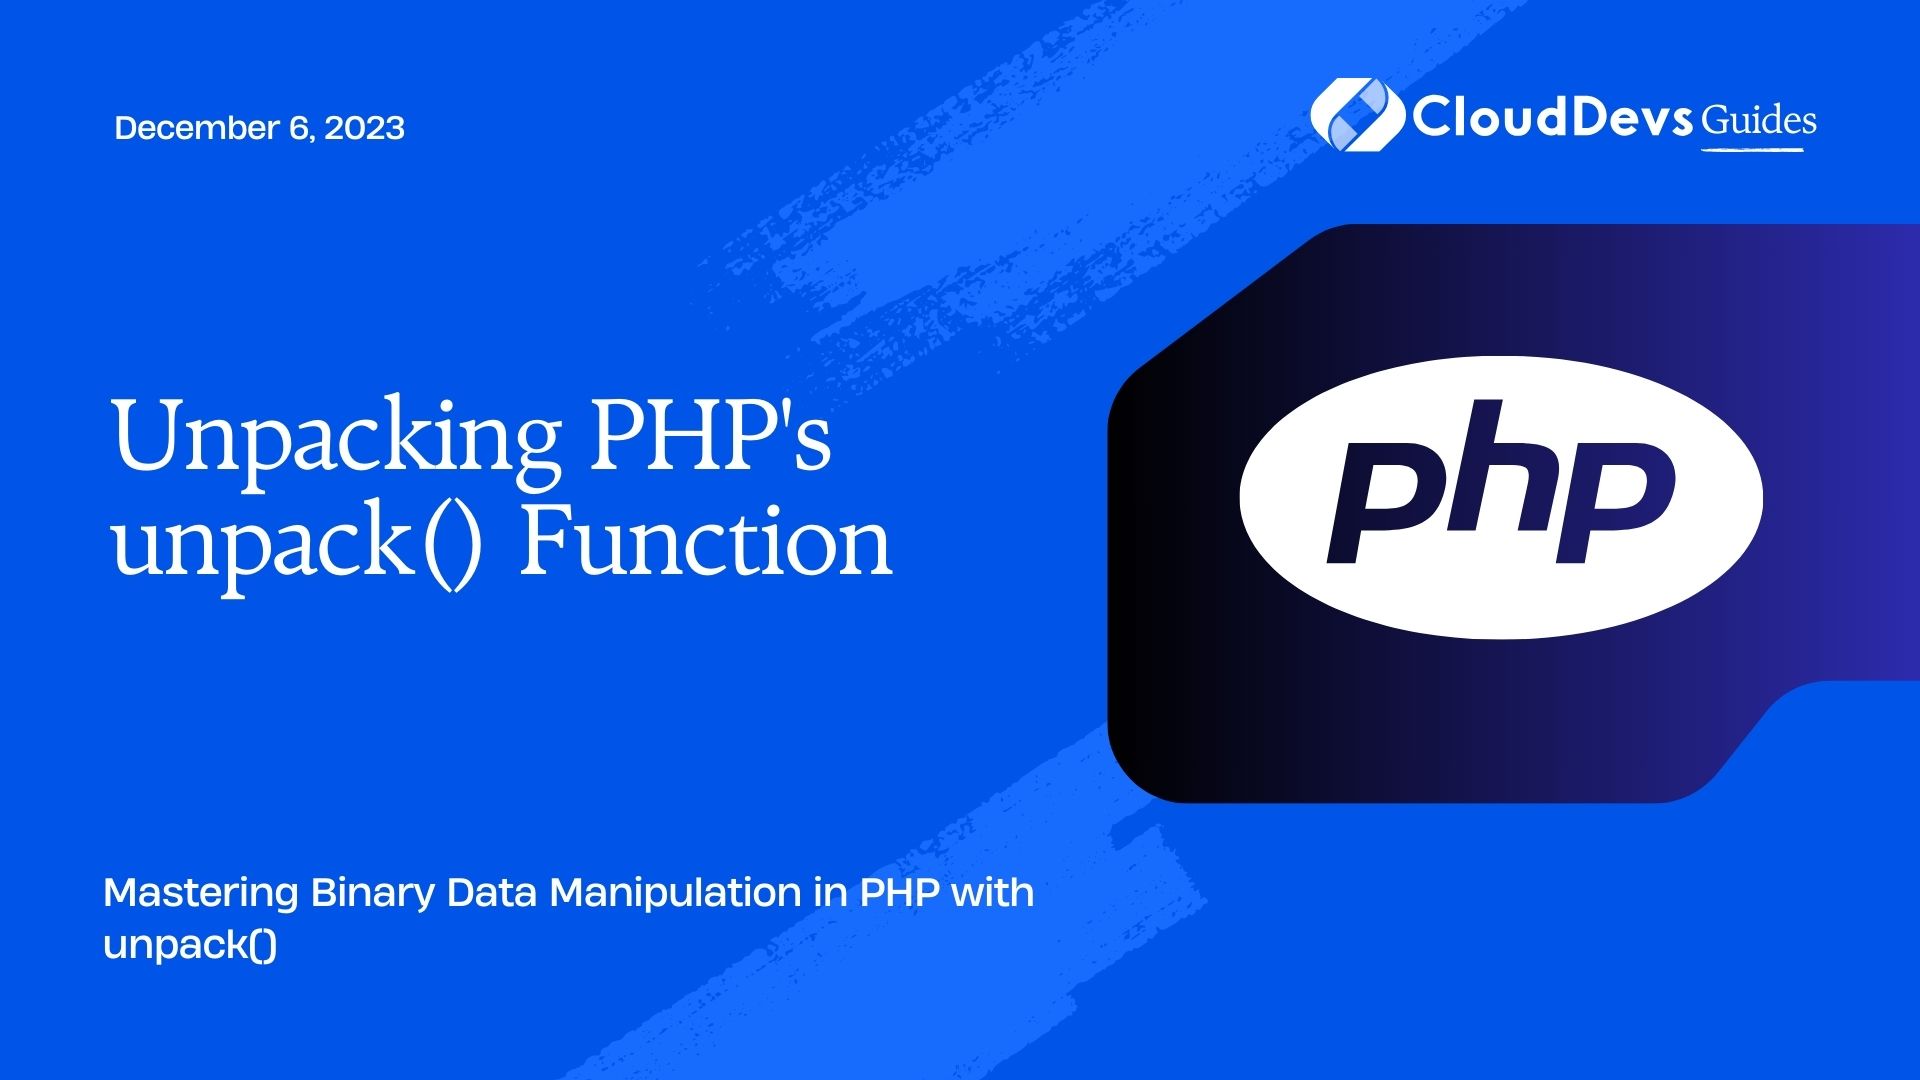 Unpacking PHP's unpack() Function